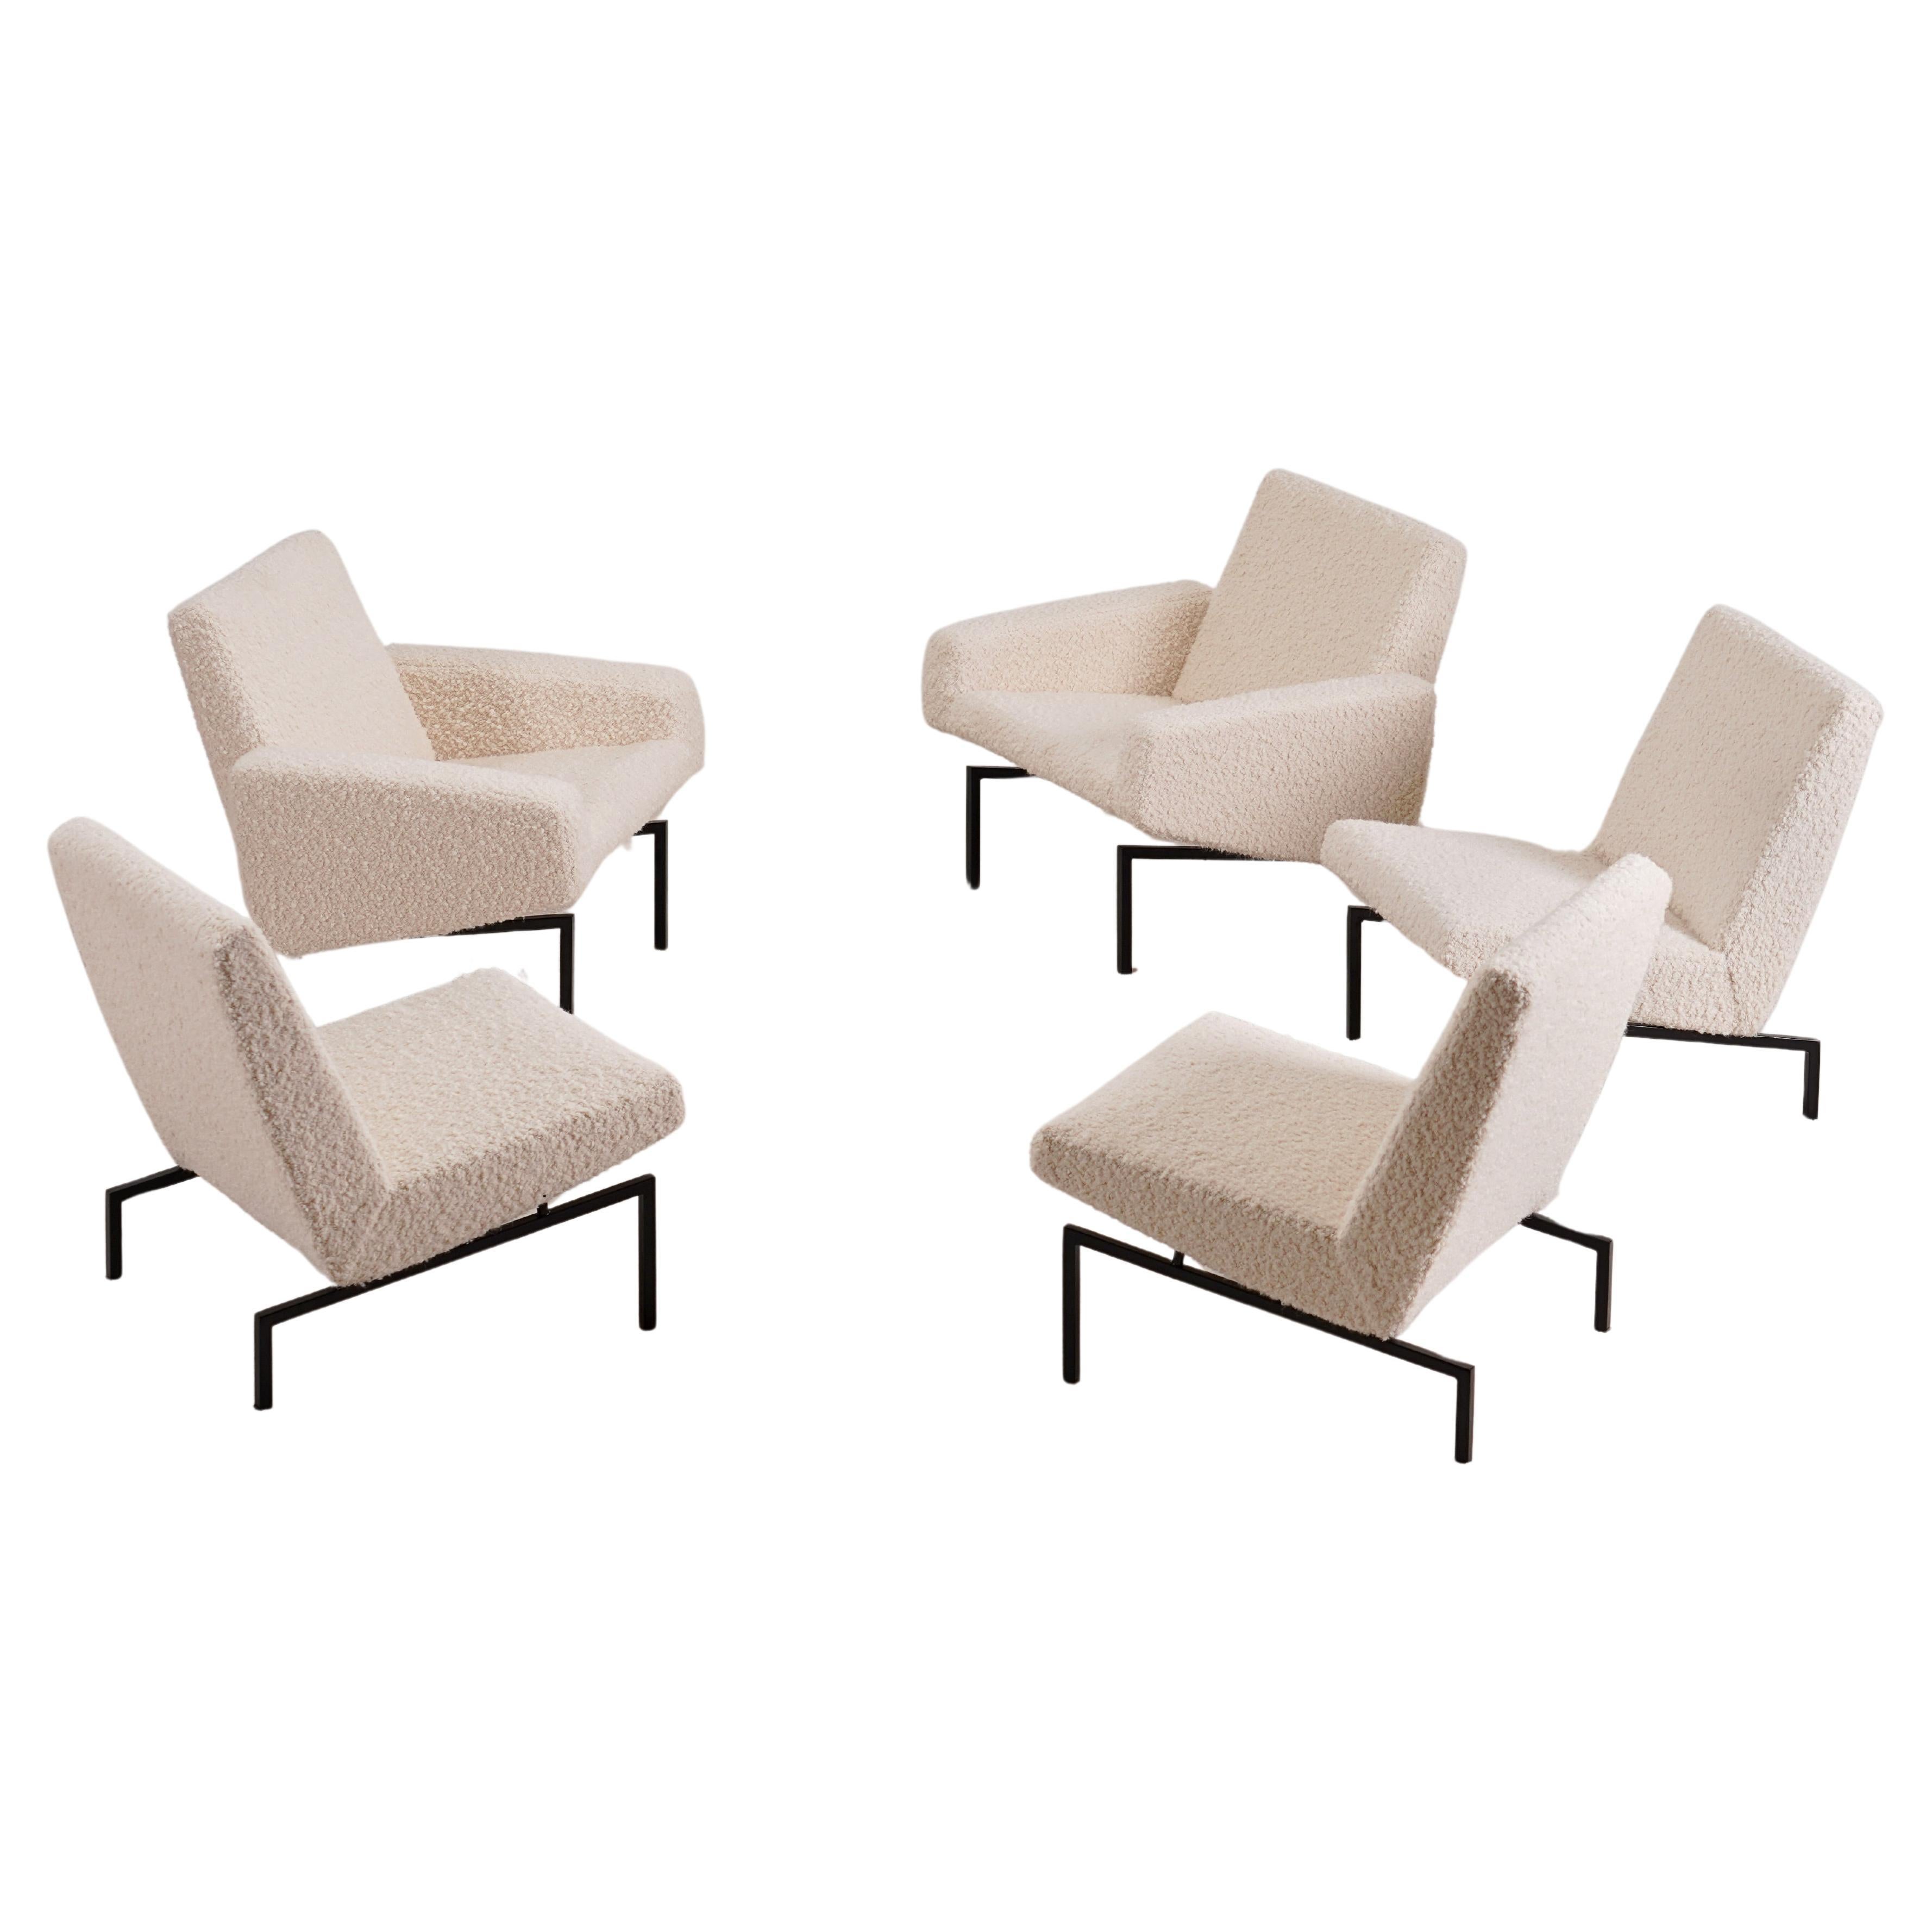 Joseph-André Motte, Rare Set of 5 "Tempo" Easy Chairs for Steiner, France, 1950